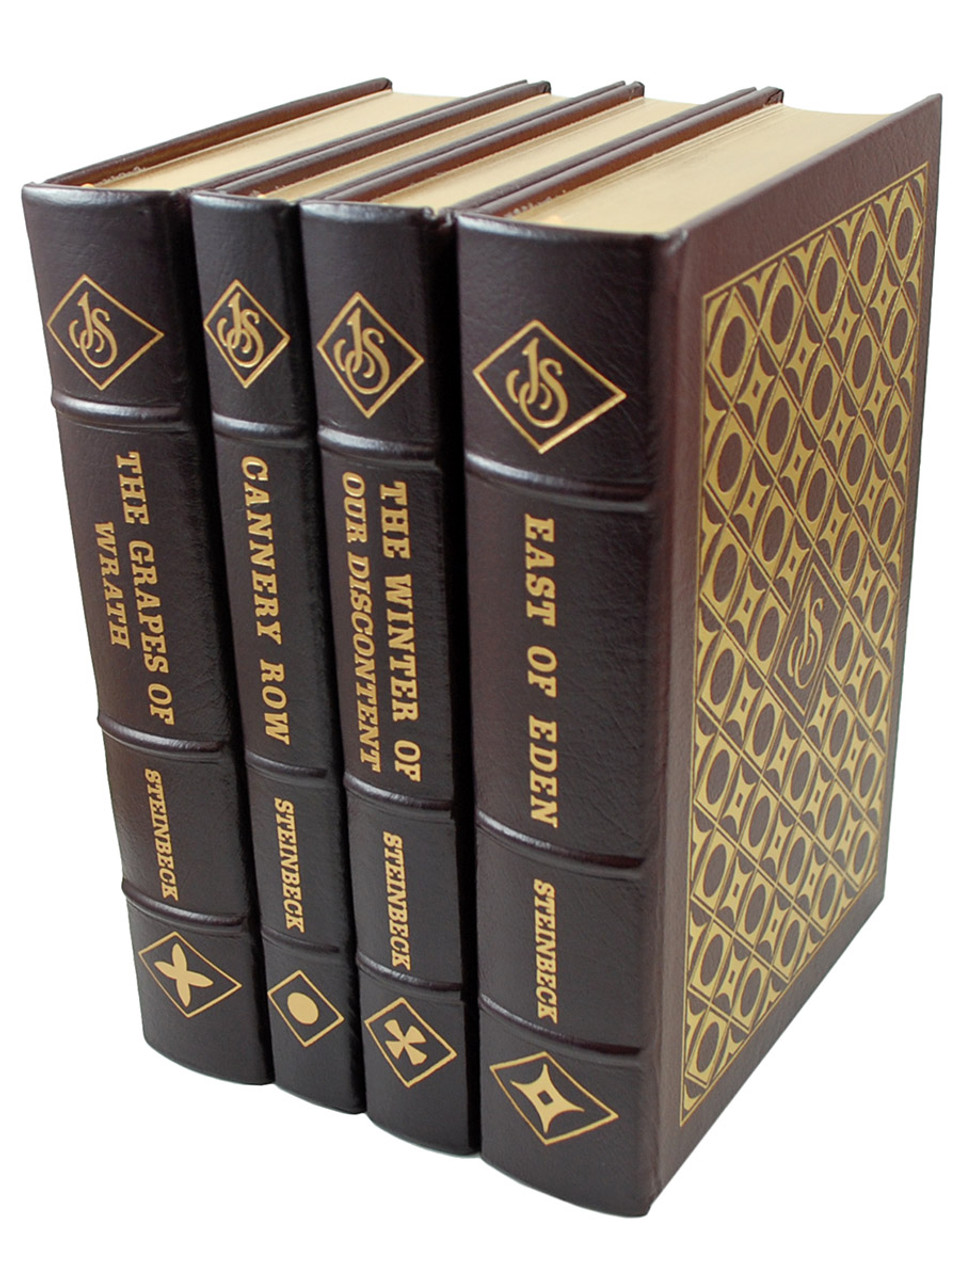 Easton Press "The Novels and Short Stories of John Steinbeck" Limited Collector's Edition, Leather Bound, 4-Vol. Matched Set